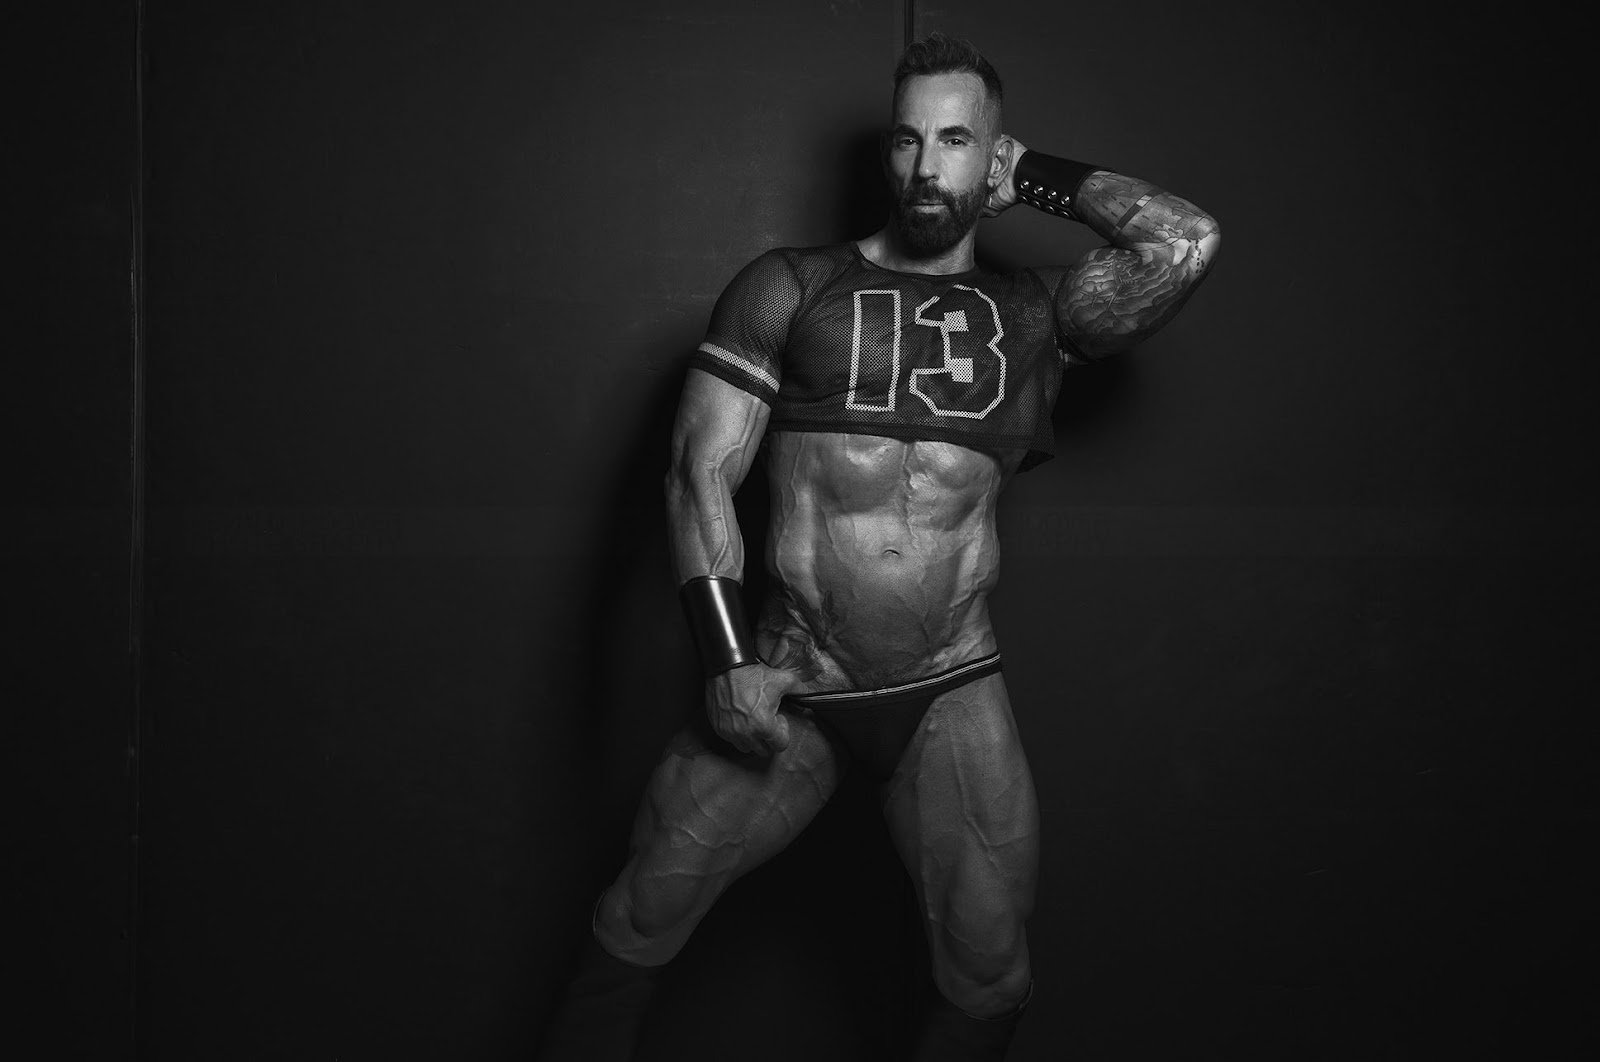 PoseS, by Kevin D. Hoover ft RePhysiques (NSFW).